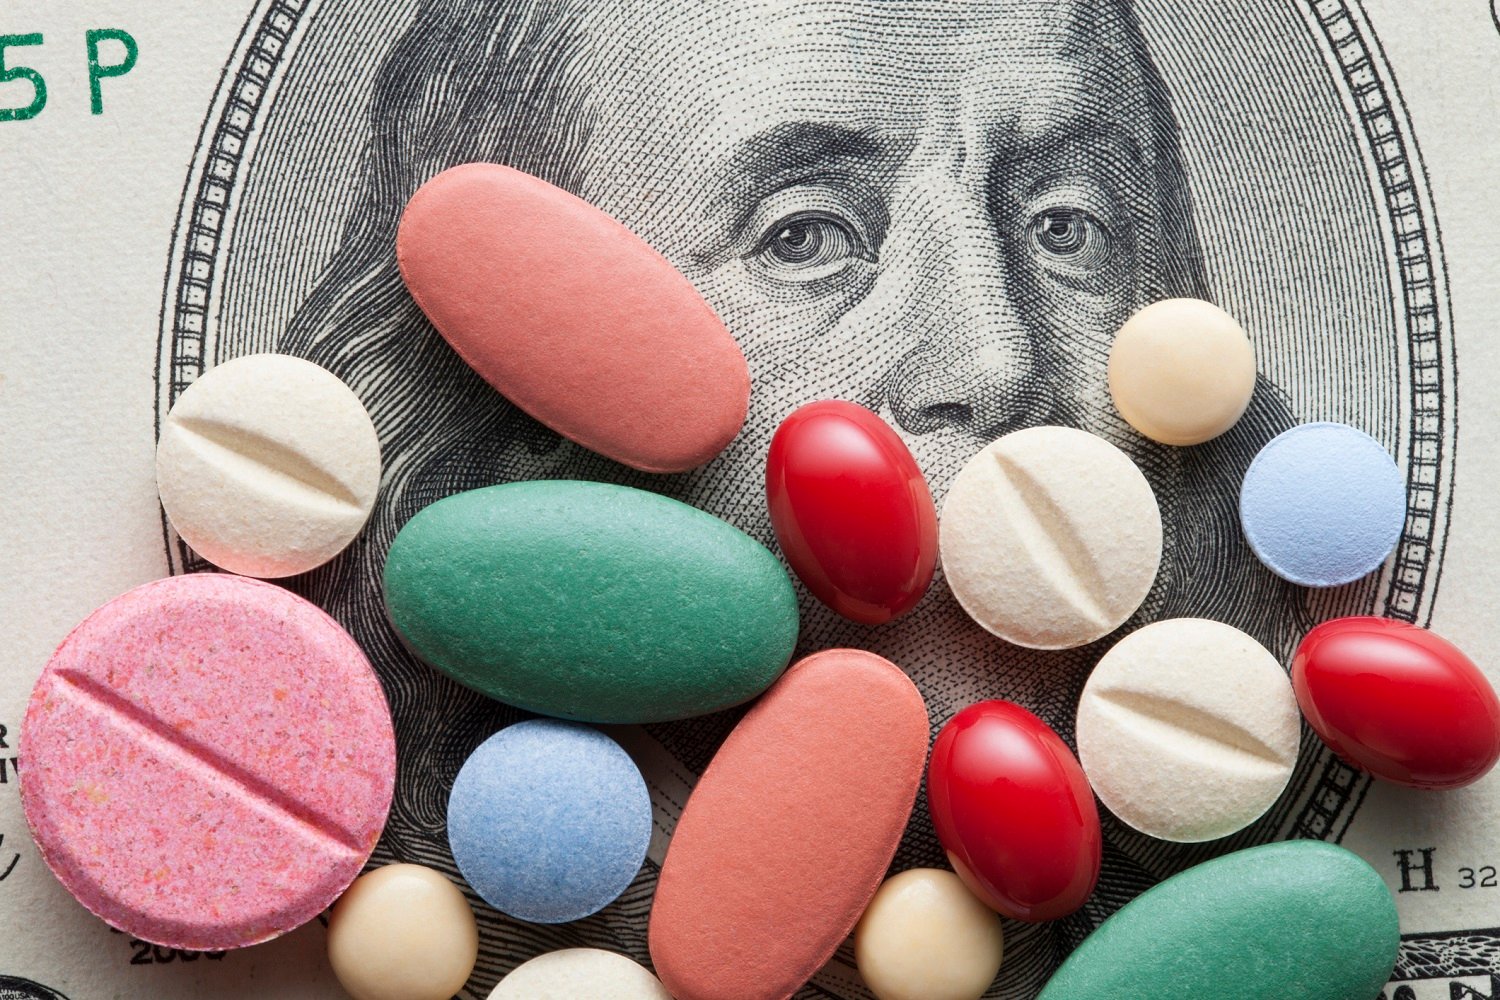 AHA: Drugmaker 340B restrictions are harming safety net hospitals financially